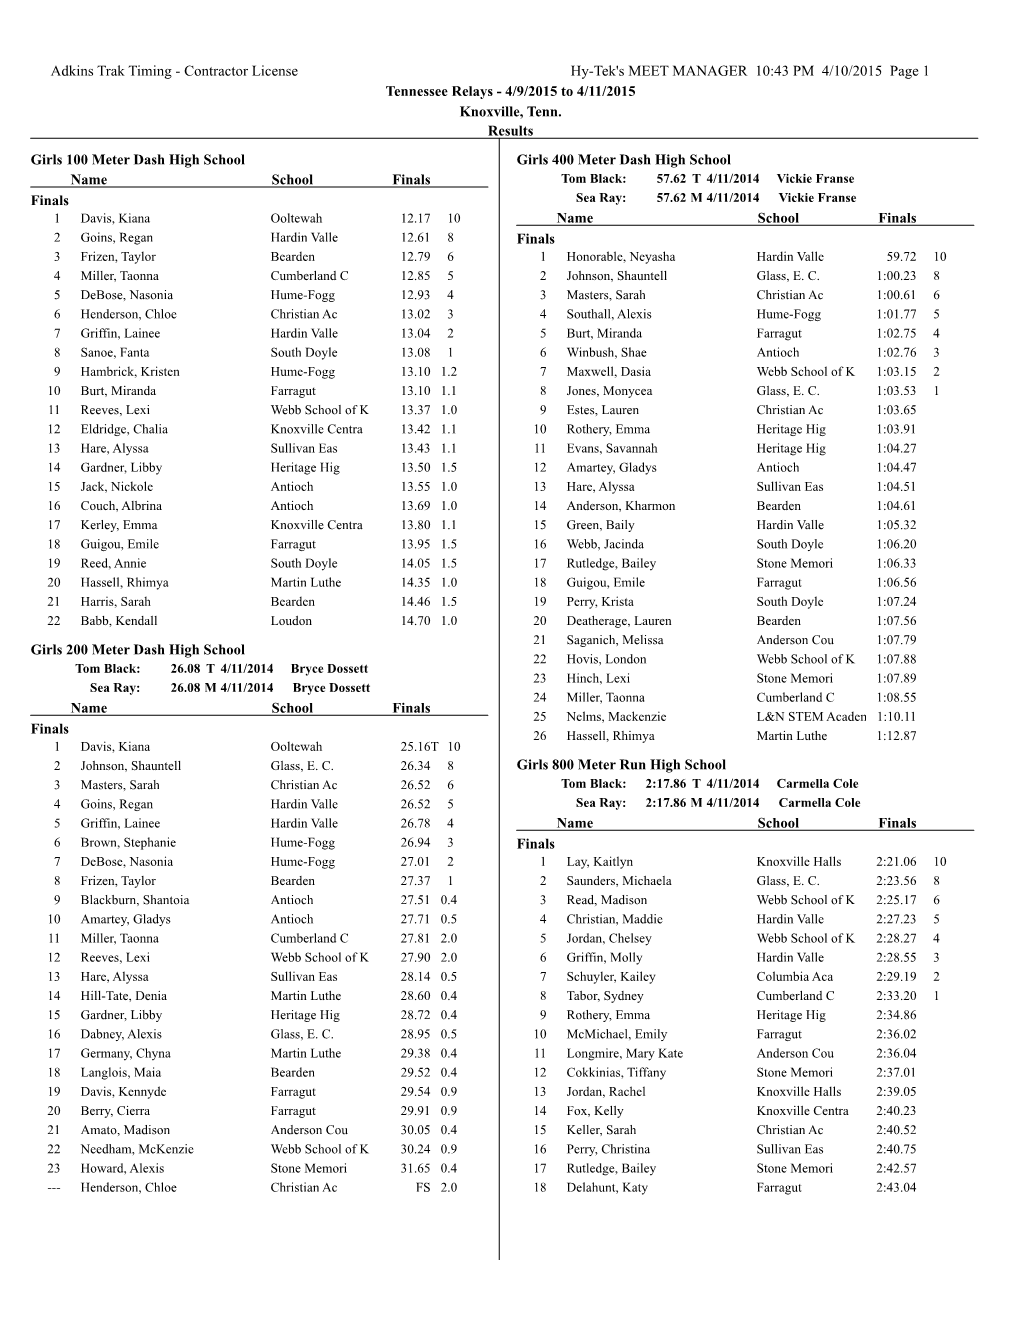 Tennessee Relays Results